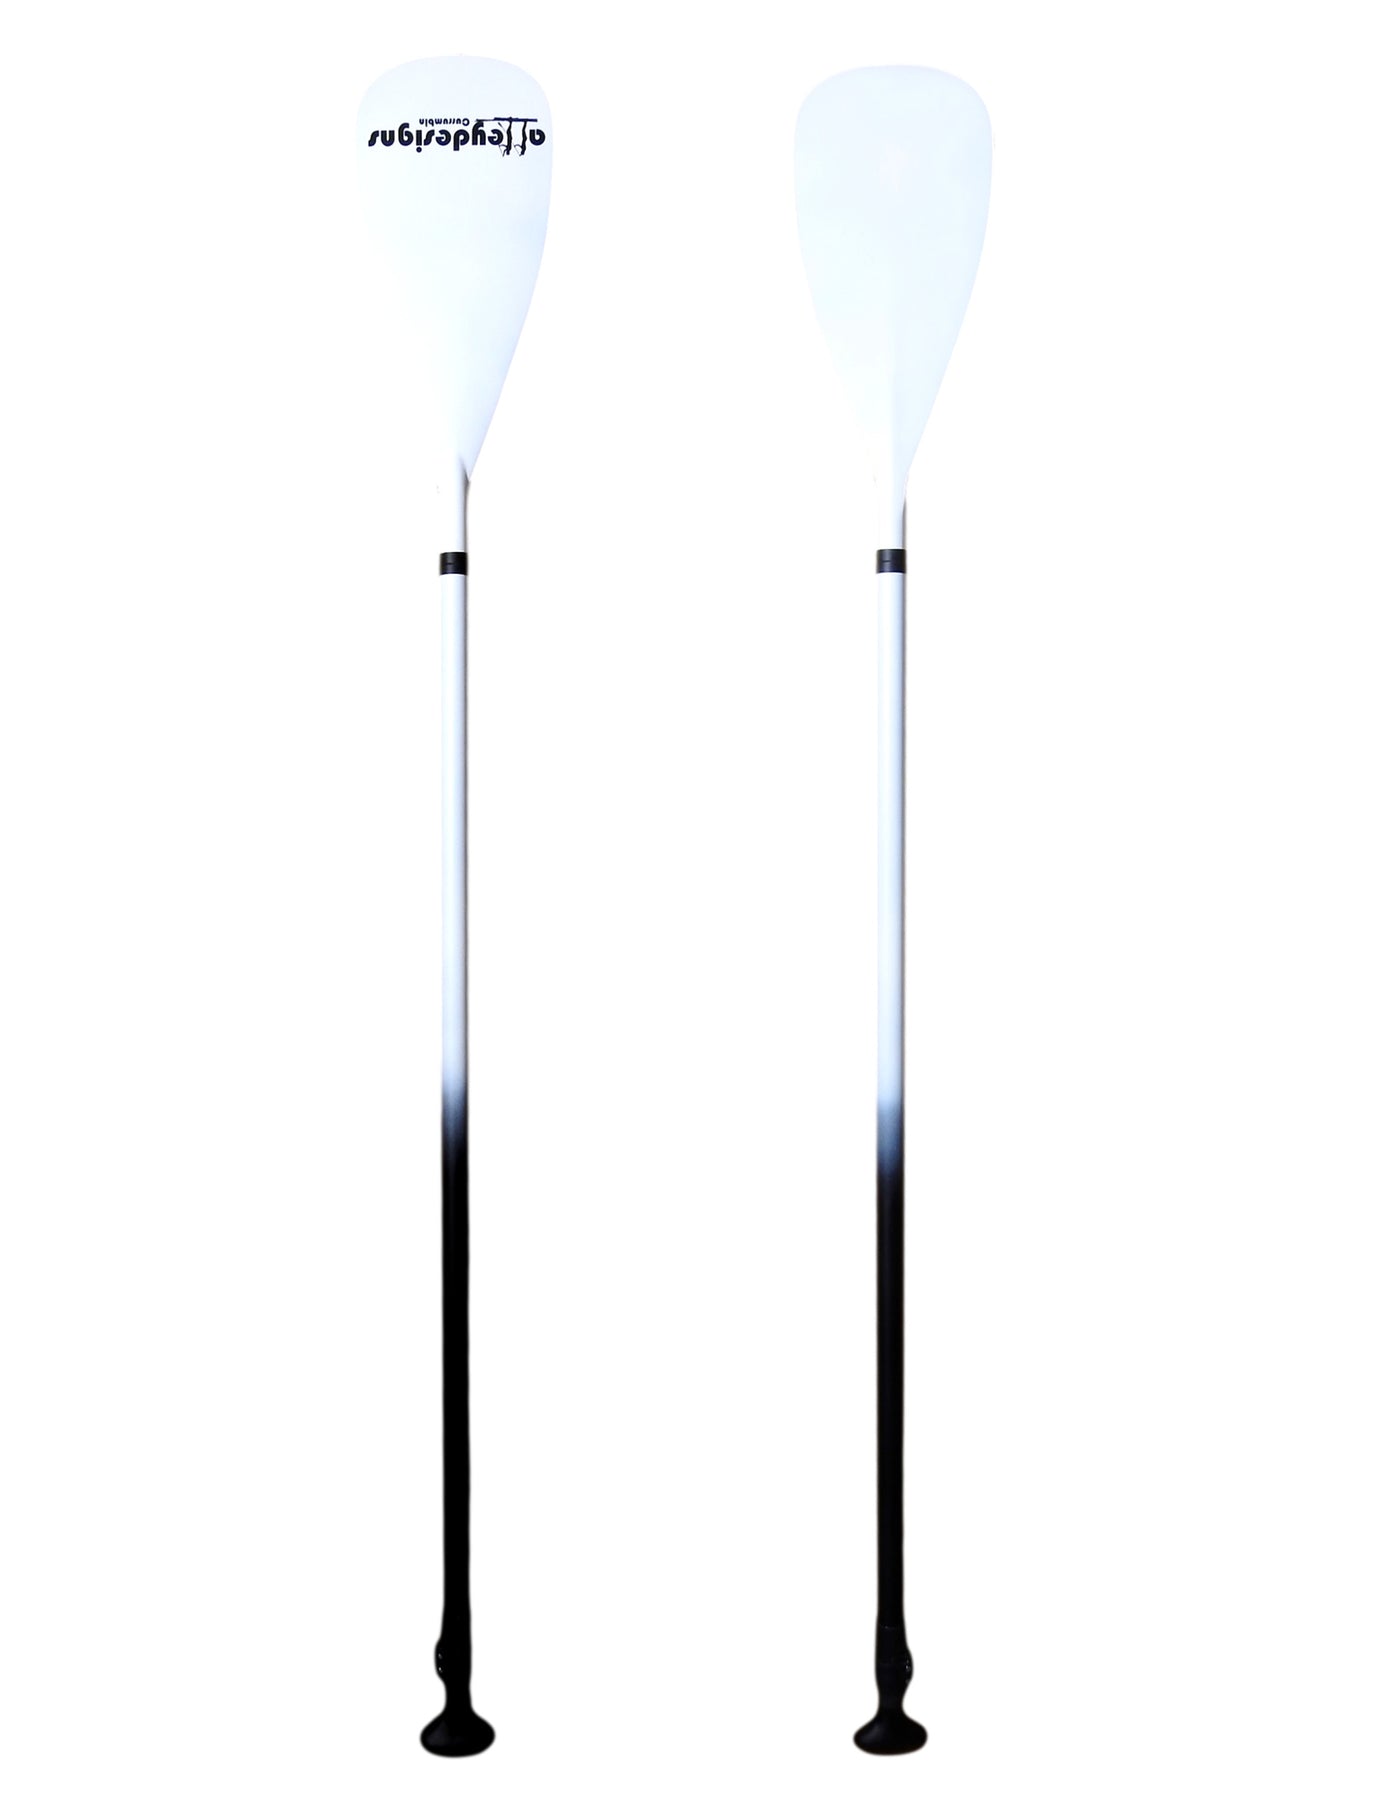 SUP Paddle White & Black Adjustable Alleydesigns Paddle - Alleydesigns  Pty Ltd                                             ABN: 44165571264